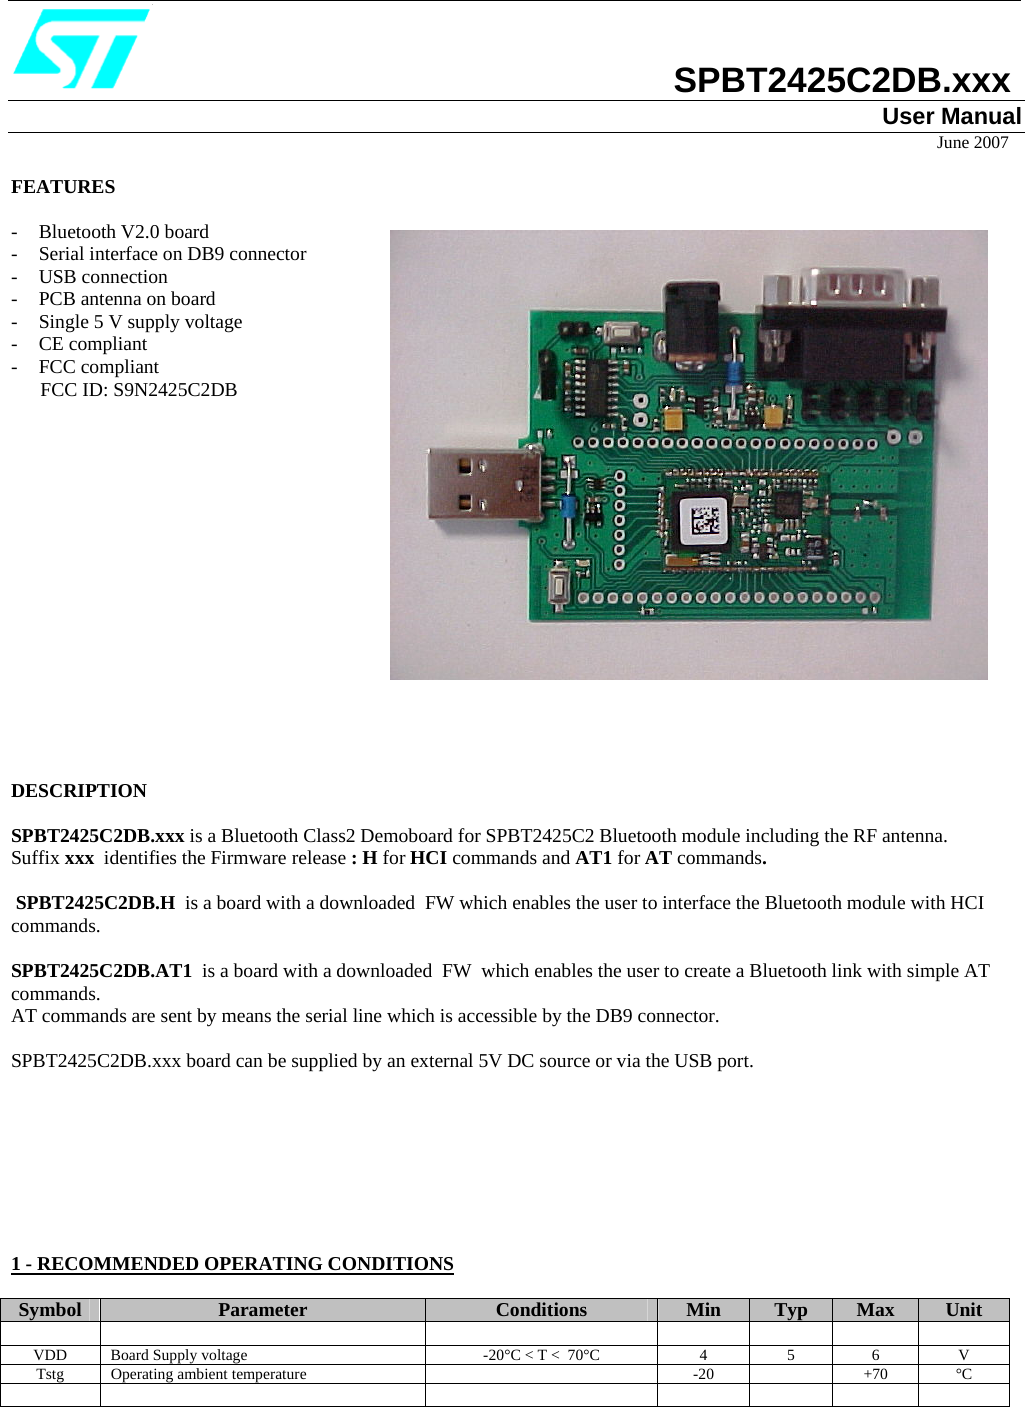                            SPBT2425C2DB.xxx User Manual                                                                                                                                                                            June 2007  FEATURES  - Bluetooth V2.0 board - Serial interface on DB9 connector - USB connection - PCB antenna on board - Single 5 V supply voltage - CE compliant - FCC compliant        FCC ID: S9N2425C2DB                                                                                                                                                                                                     DESCRIPTION  SPBT2425C2DB.xxx is a Bluetooth Class2 Demoboard for SPBT2425C2 Bluetooth module including the RF antenna. Suffix xxx  identifies the Firmware release : H for HCI commands and AT1 for AT commands.  SPBT2425C2DB.H  is a board with a downloaded  FW which enables the user to interface the Bluetooth module with HCI commands. SPBT2425C2DB.AT1  is a board with a downloaded  FW  which enables the user to create a Bluetooth link with simple AT commands. AT commands are sent by means the serial line which is accessible by the DB9 connector.  SPBT2425C2DB.xxx board can be supplied by an external 5V DC source or via the USB port.         1 - RECOMMENDED OPERATING CONDITIONS  Symbol  Parameter  Conditions  Min  Typ  Max  Unit             VDD  Board Supply voltage   -20°C &lt; T &lt;  70°C  4  5  6  V Tstg Operating ambient temperature    -20    +70  °C                